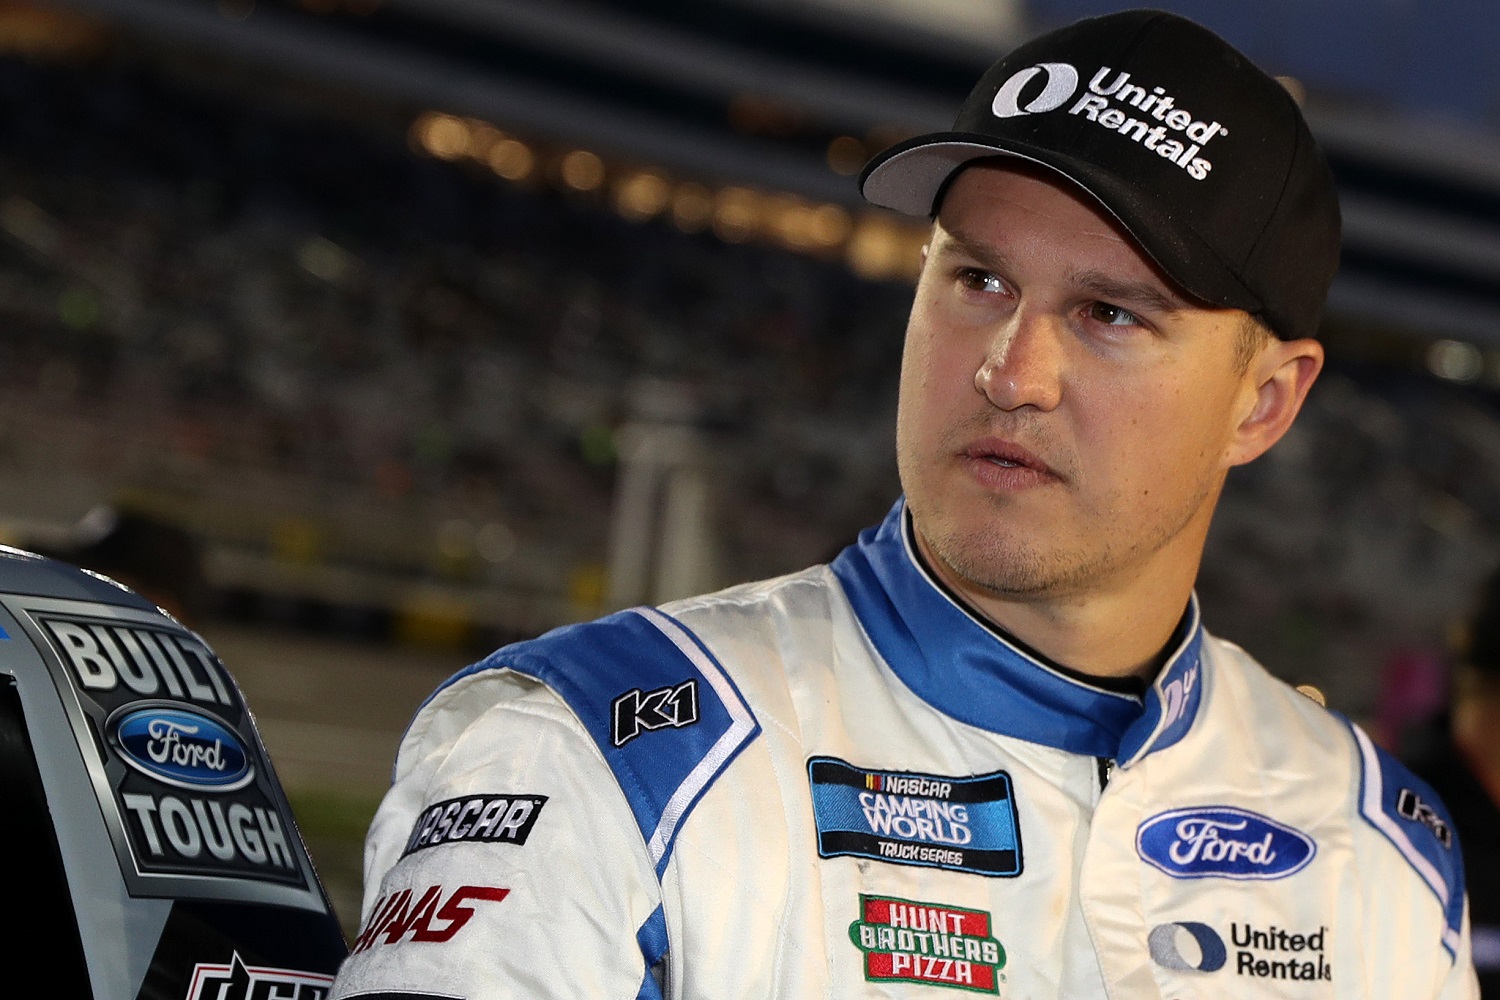 Ryan Preece waits on the grid prior to the NASCAR Camping World Truck Series Victoria's Voice Foundation 200 at Las Vegas Motor Speedway on March 4, 2022. | Meg Oliphant/Getty Images